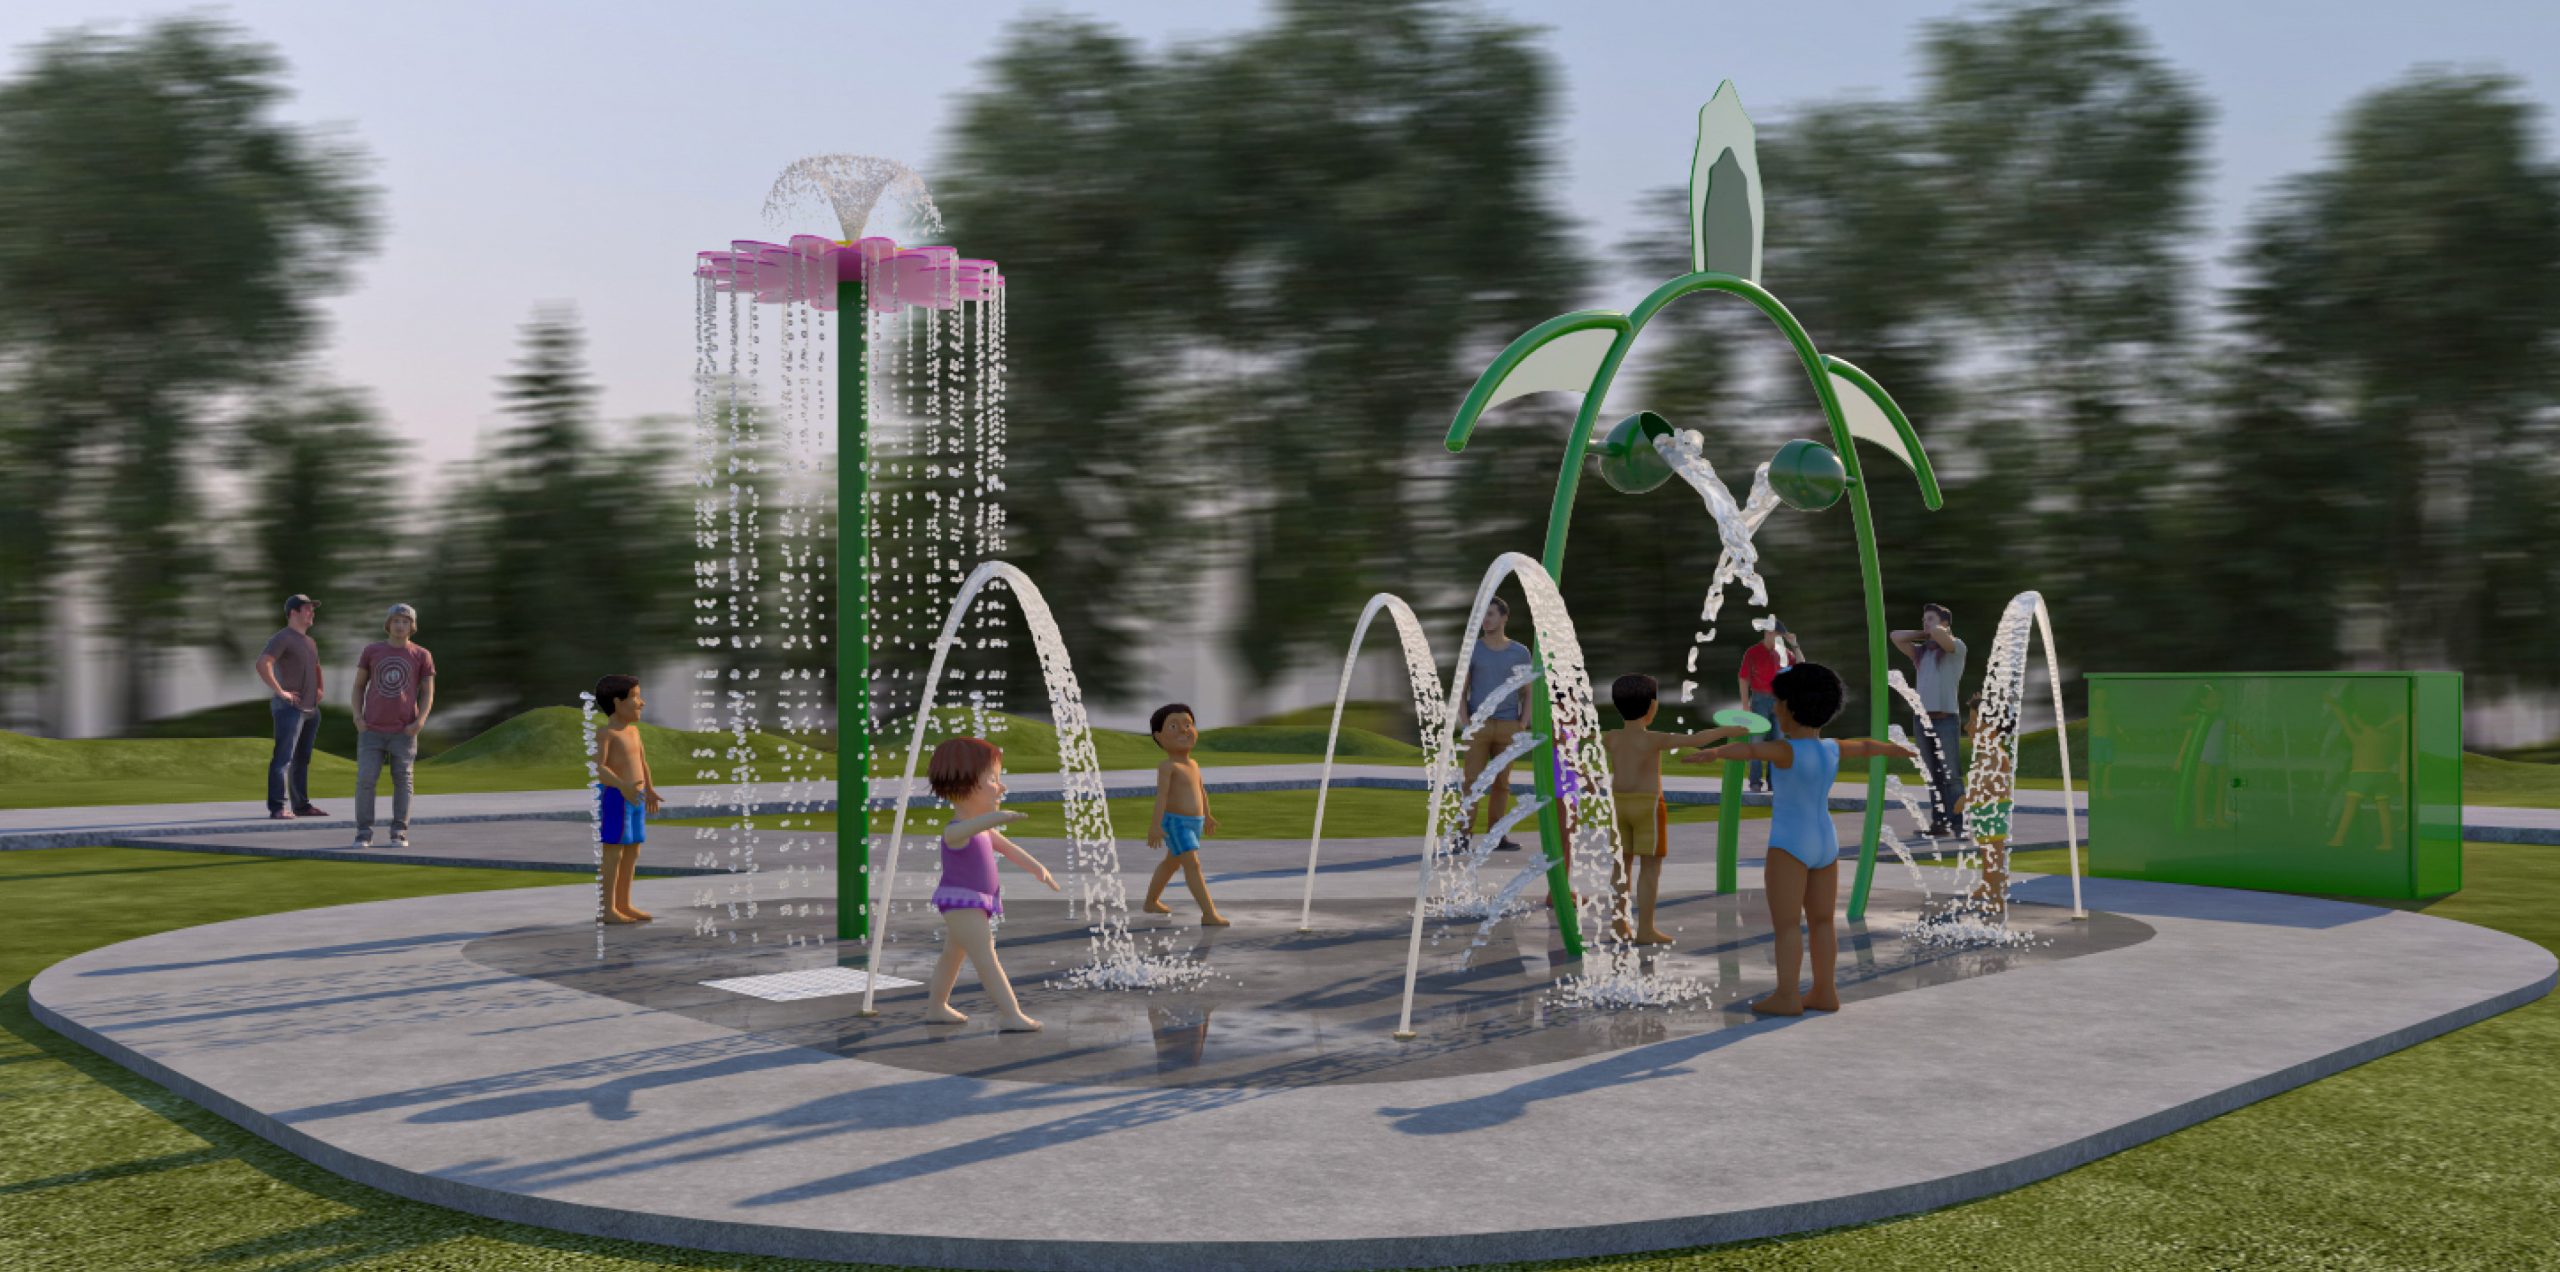 Rendering of the new splash pad that includes a sea turtle play feature, daisy post play feature, spray jets and an on/off sensor.